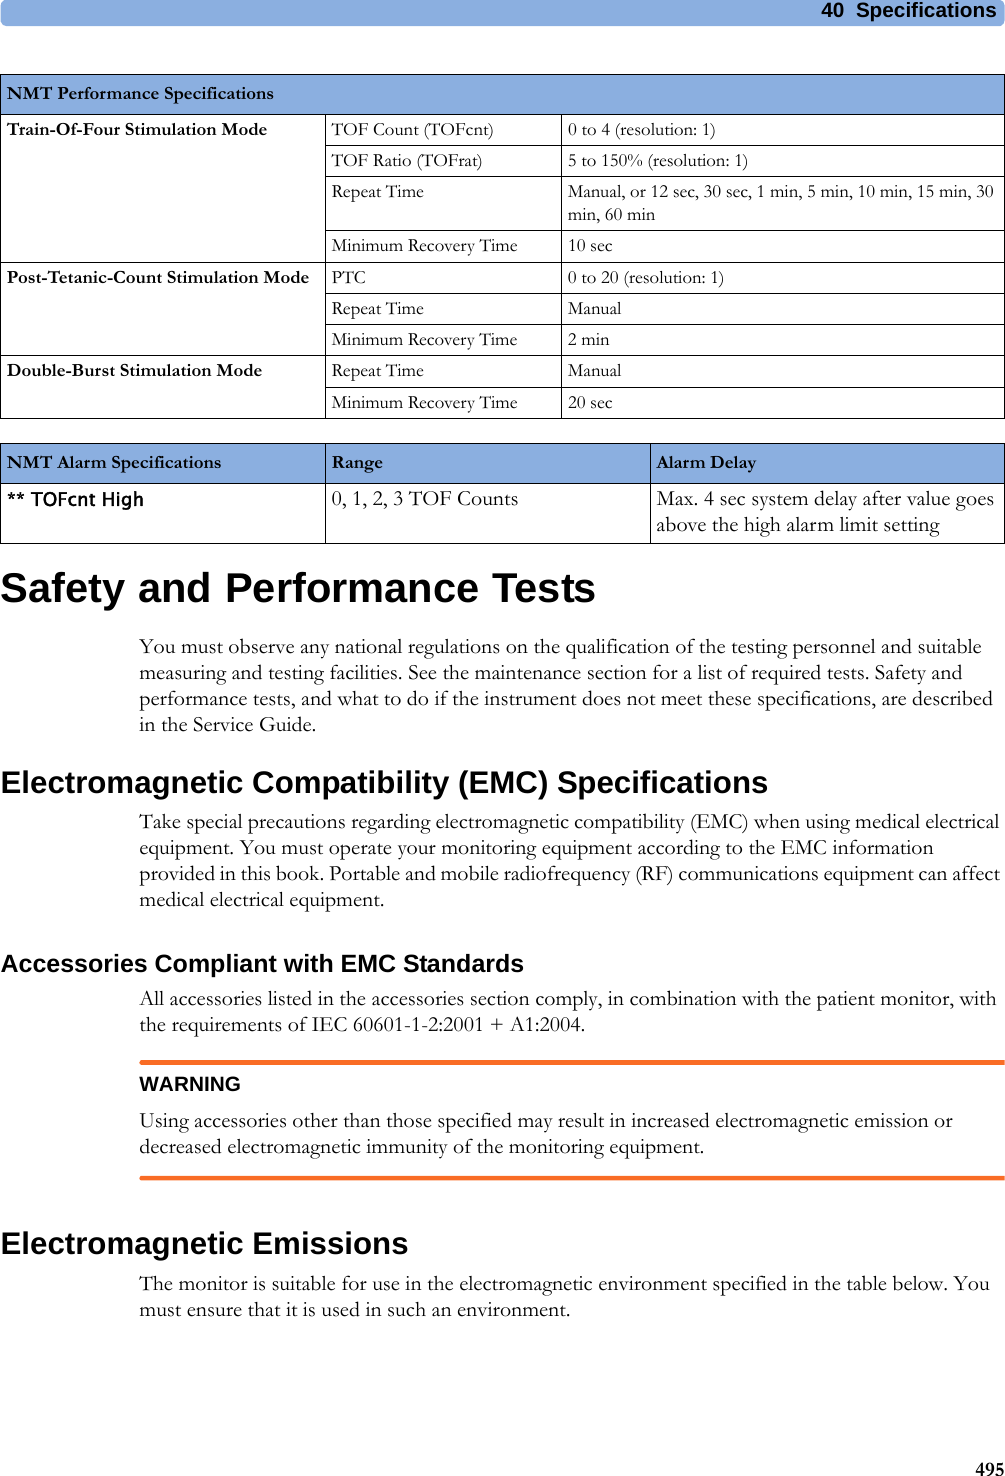 40 Specifications495Safety and Performance TestsYou must observe any national regulations on the qualification of the testing personnel and suitable measuring and testing facilities. See the maintenance section for a list of required tests. Safety and performance tests, and what to do if the instrument does not meet these specifications, are described in the Service Guide.Electromagnetic Compatibility (EMC) SpecificationsTake special precautions regarding electromagnetic compatibility (EMC) when using medical electrical equipment. You must operate your monitoring equipment according to the EMC information provided in this book. Portable and mobile radiofrequency (RF) communications equipment can affect medical electrical equipment.Accessories Compliant with EMC StandardsAll accessories listed in the accessories section comply, in combination with the patient monitor, with the requirements of IEC 60601-1-2:2001 + A1:2004.WARNINGUsing accessories other than those specified may result in increased electromagnetic emission or decreased electromagnetic immunity of the monitoring equipment.Electromagnetic EmissionsThe monitor is suitable for use in the electromagnetic environment specified in the table below. You must ensure that it is used in such an environment.Train-Of-Four Stimulation Mode TOF Count (TOFcnt) 0 to 4 (resolution: 1)TOF Ratio (TOFrat) 5 to 150% (resolution: 1)Repeat Time Manual, or 12 sec, 30 sec, 1 min, 5 min, 10 min, 15 min, 30 min, 60 minMinimum Recovery Time 10 secPost-Tetanic-Count Stimulation Mode PTC 0 to 20 (resolution: 1)Repeat Time ManualMinimum Recovery Time 2 minDouble-Burst Stimulation Mode Repeat Time ManualMinimum Recovery Time 20 secNMT Performance SpecificationsNMT Alarm Specifications Range Alarm Delay** TOFcnt High 0, 1, 2, 3 TOF Counts Max. 4 sec system delay after value goes above the high alarm limit setting